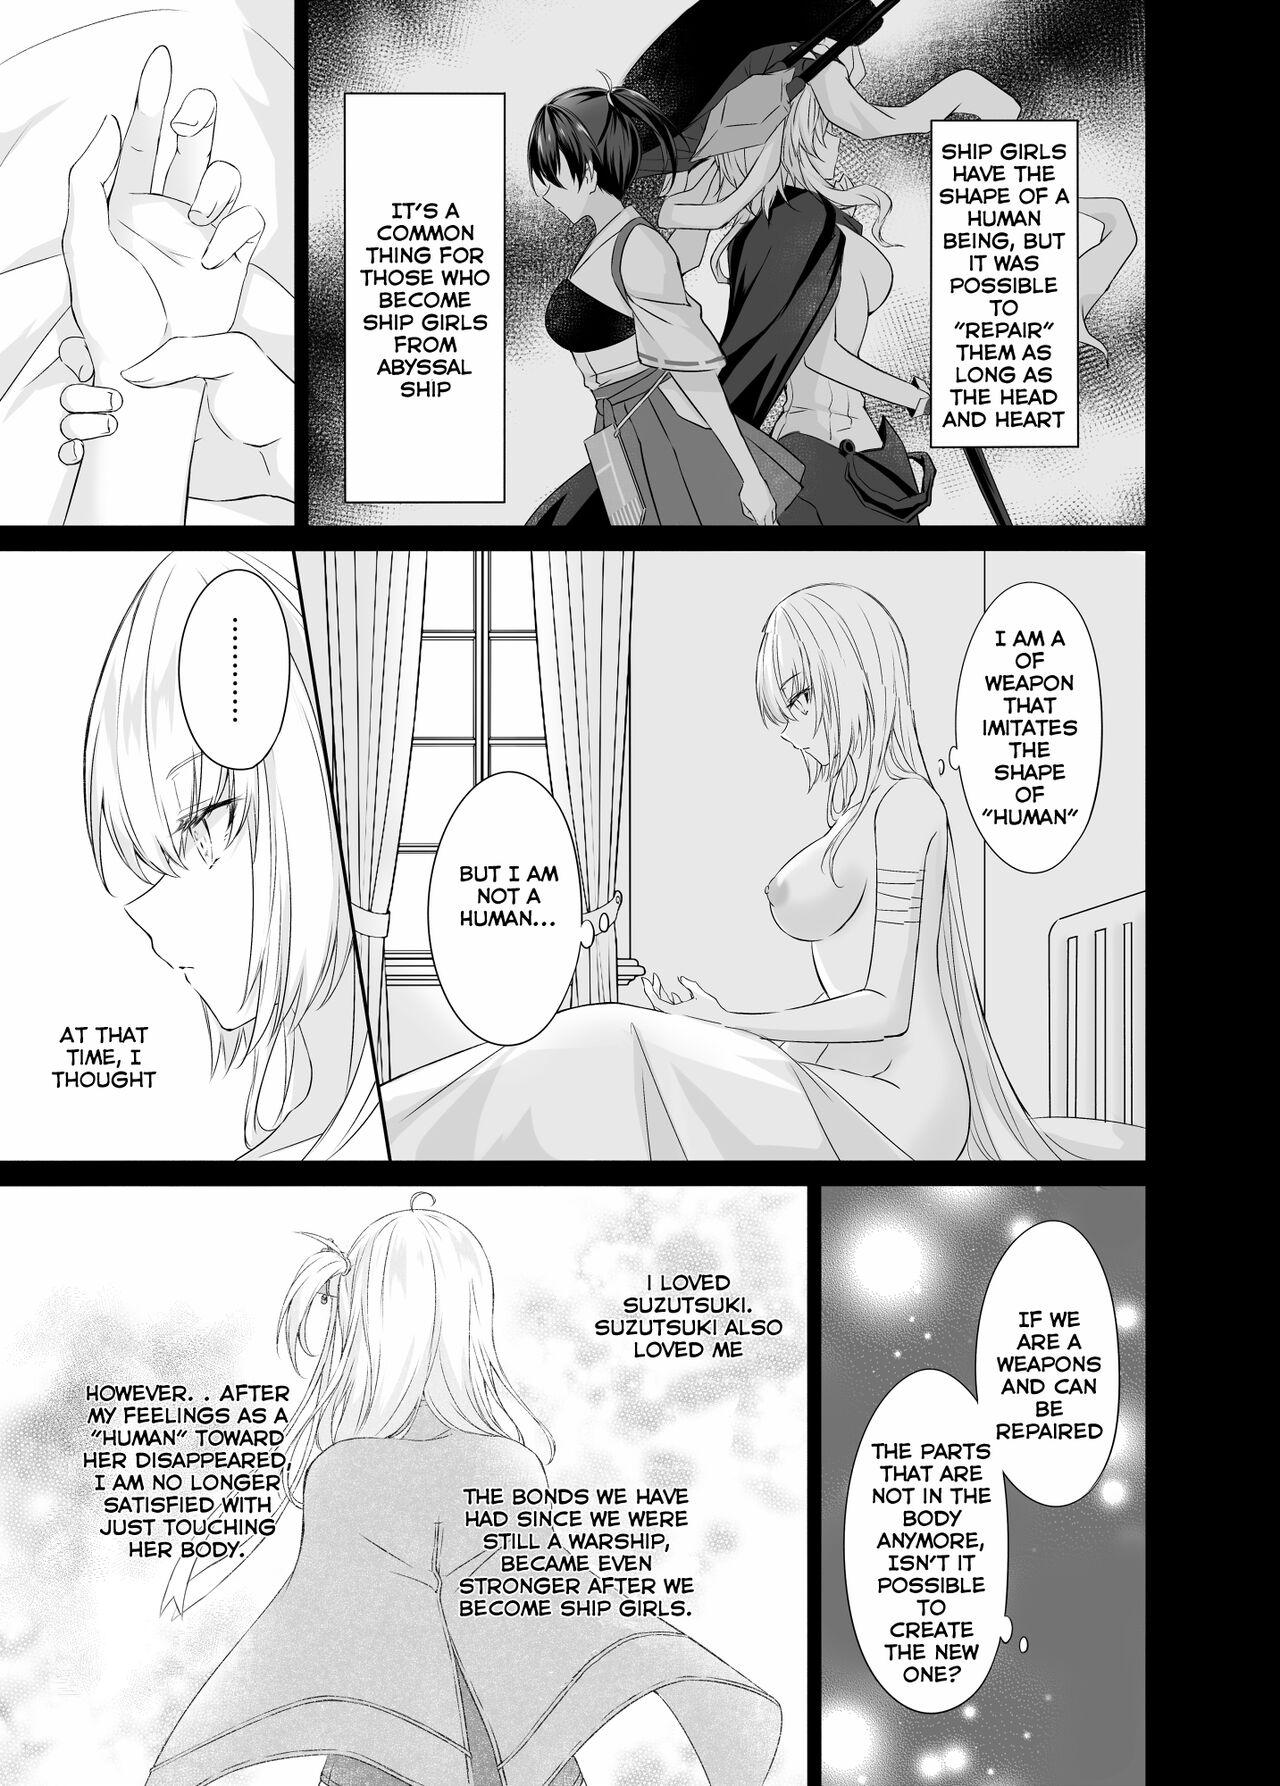 Stretching [my pace world (Kabocha Torte)] Gesshoku -end of Lament- | Lunar Eclipse -end of Lament- (Kantai Collection -KanColle-) [English] [Digital] - Kantai collection Juicy - Page 10